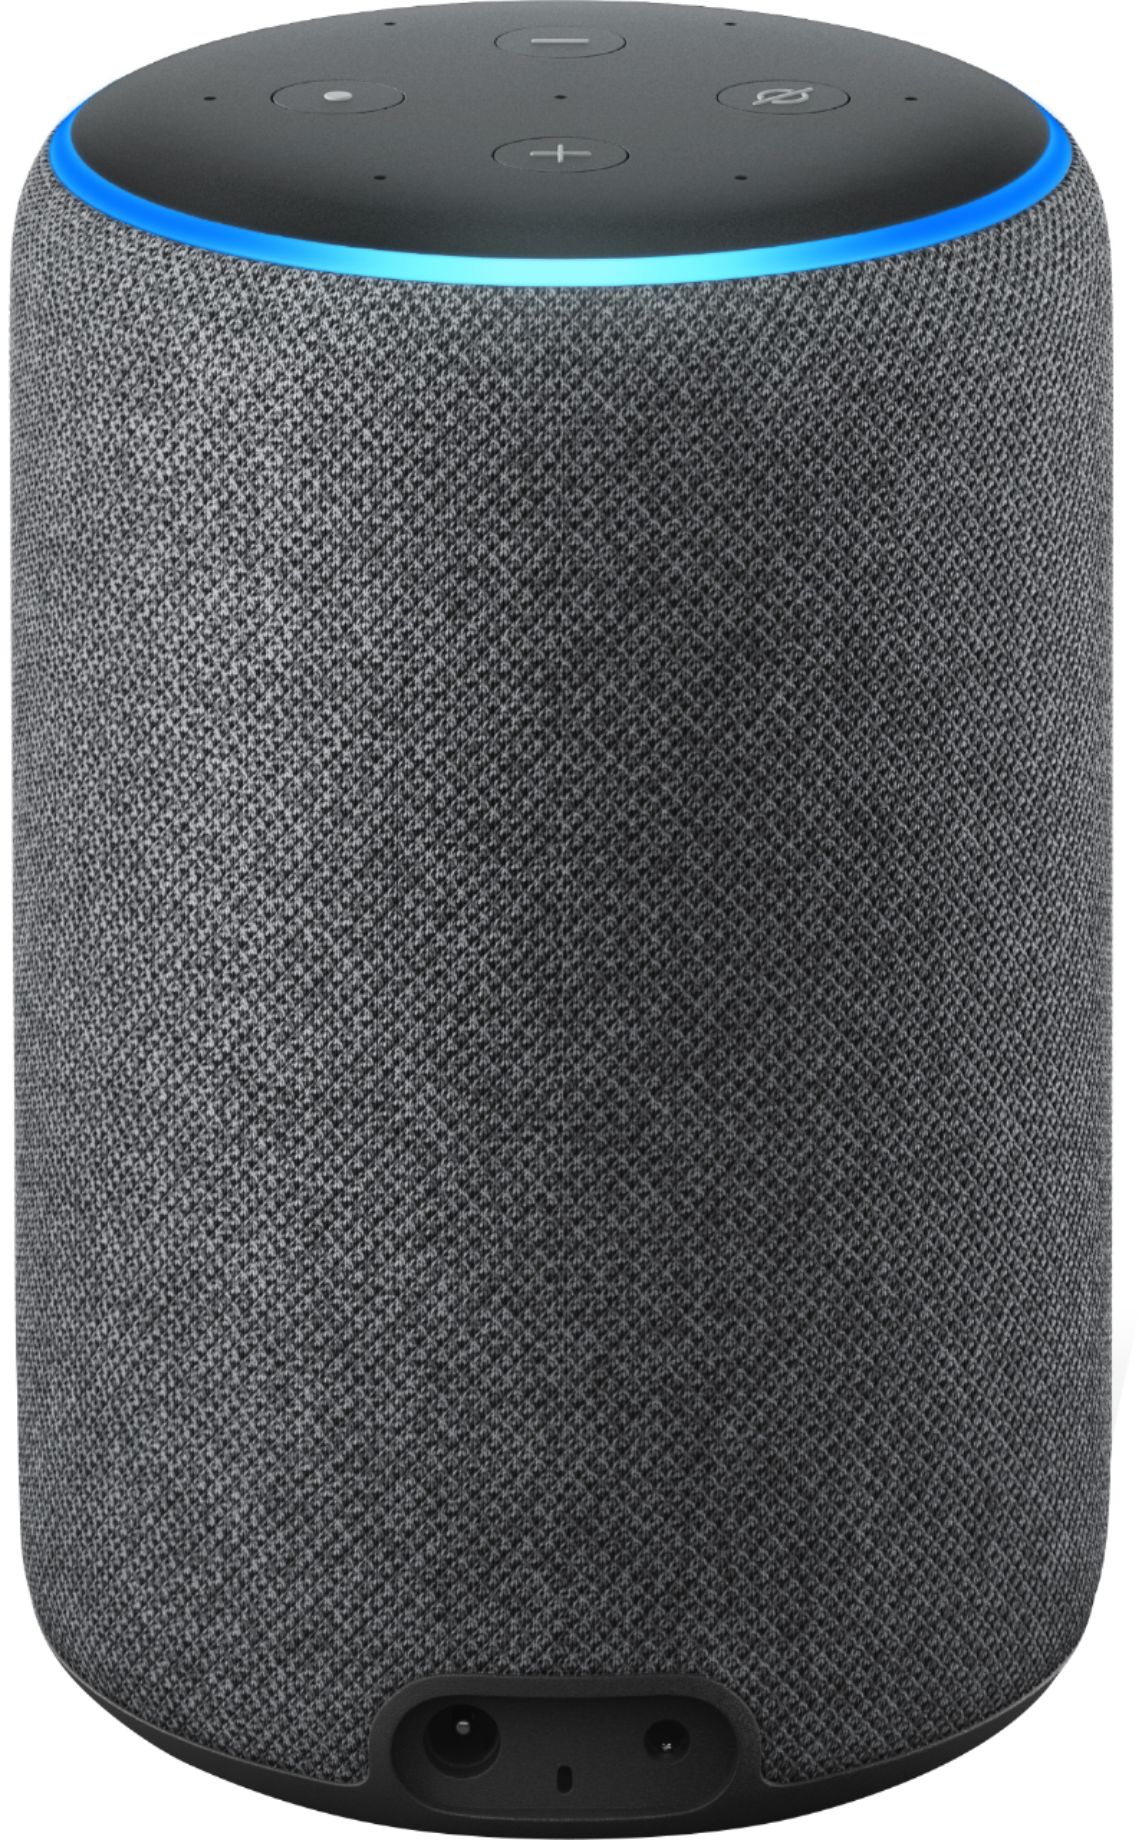 Amazon Echo (3rd Generation Smart Speaker, Powered by Dolby for 360 deg, 4 microphones)